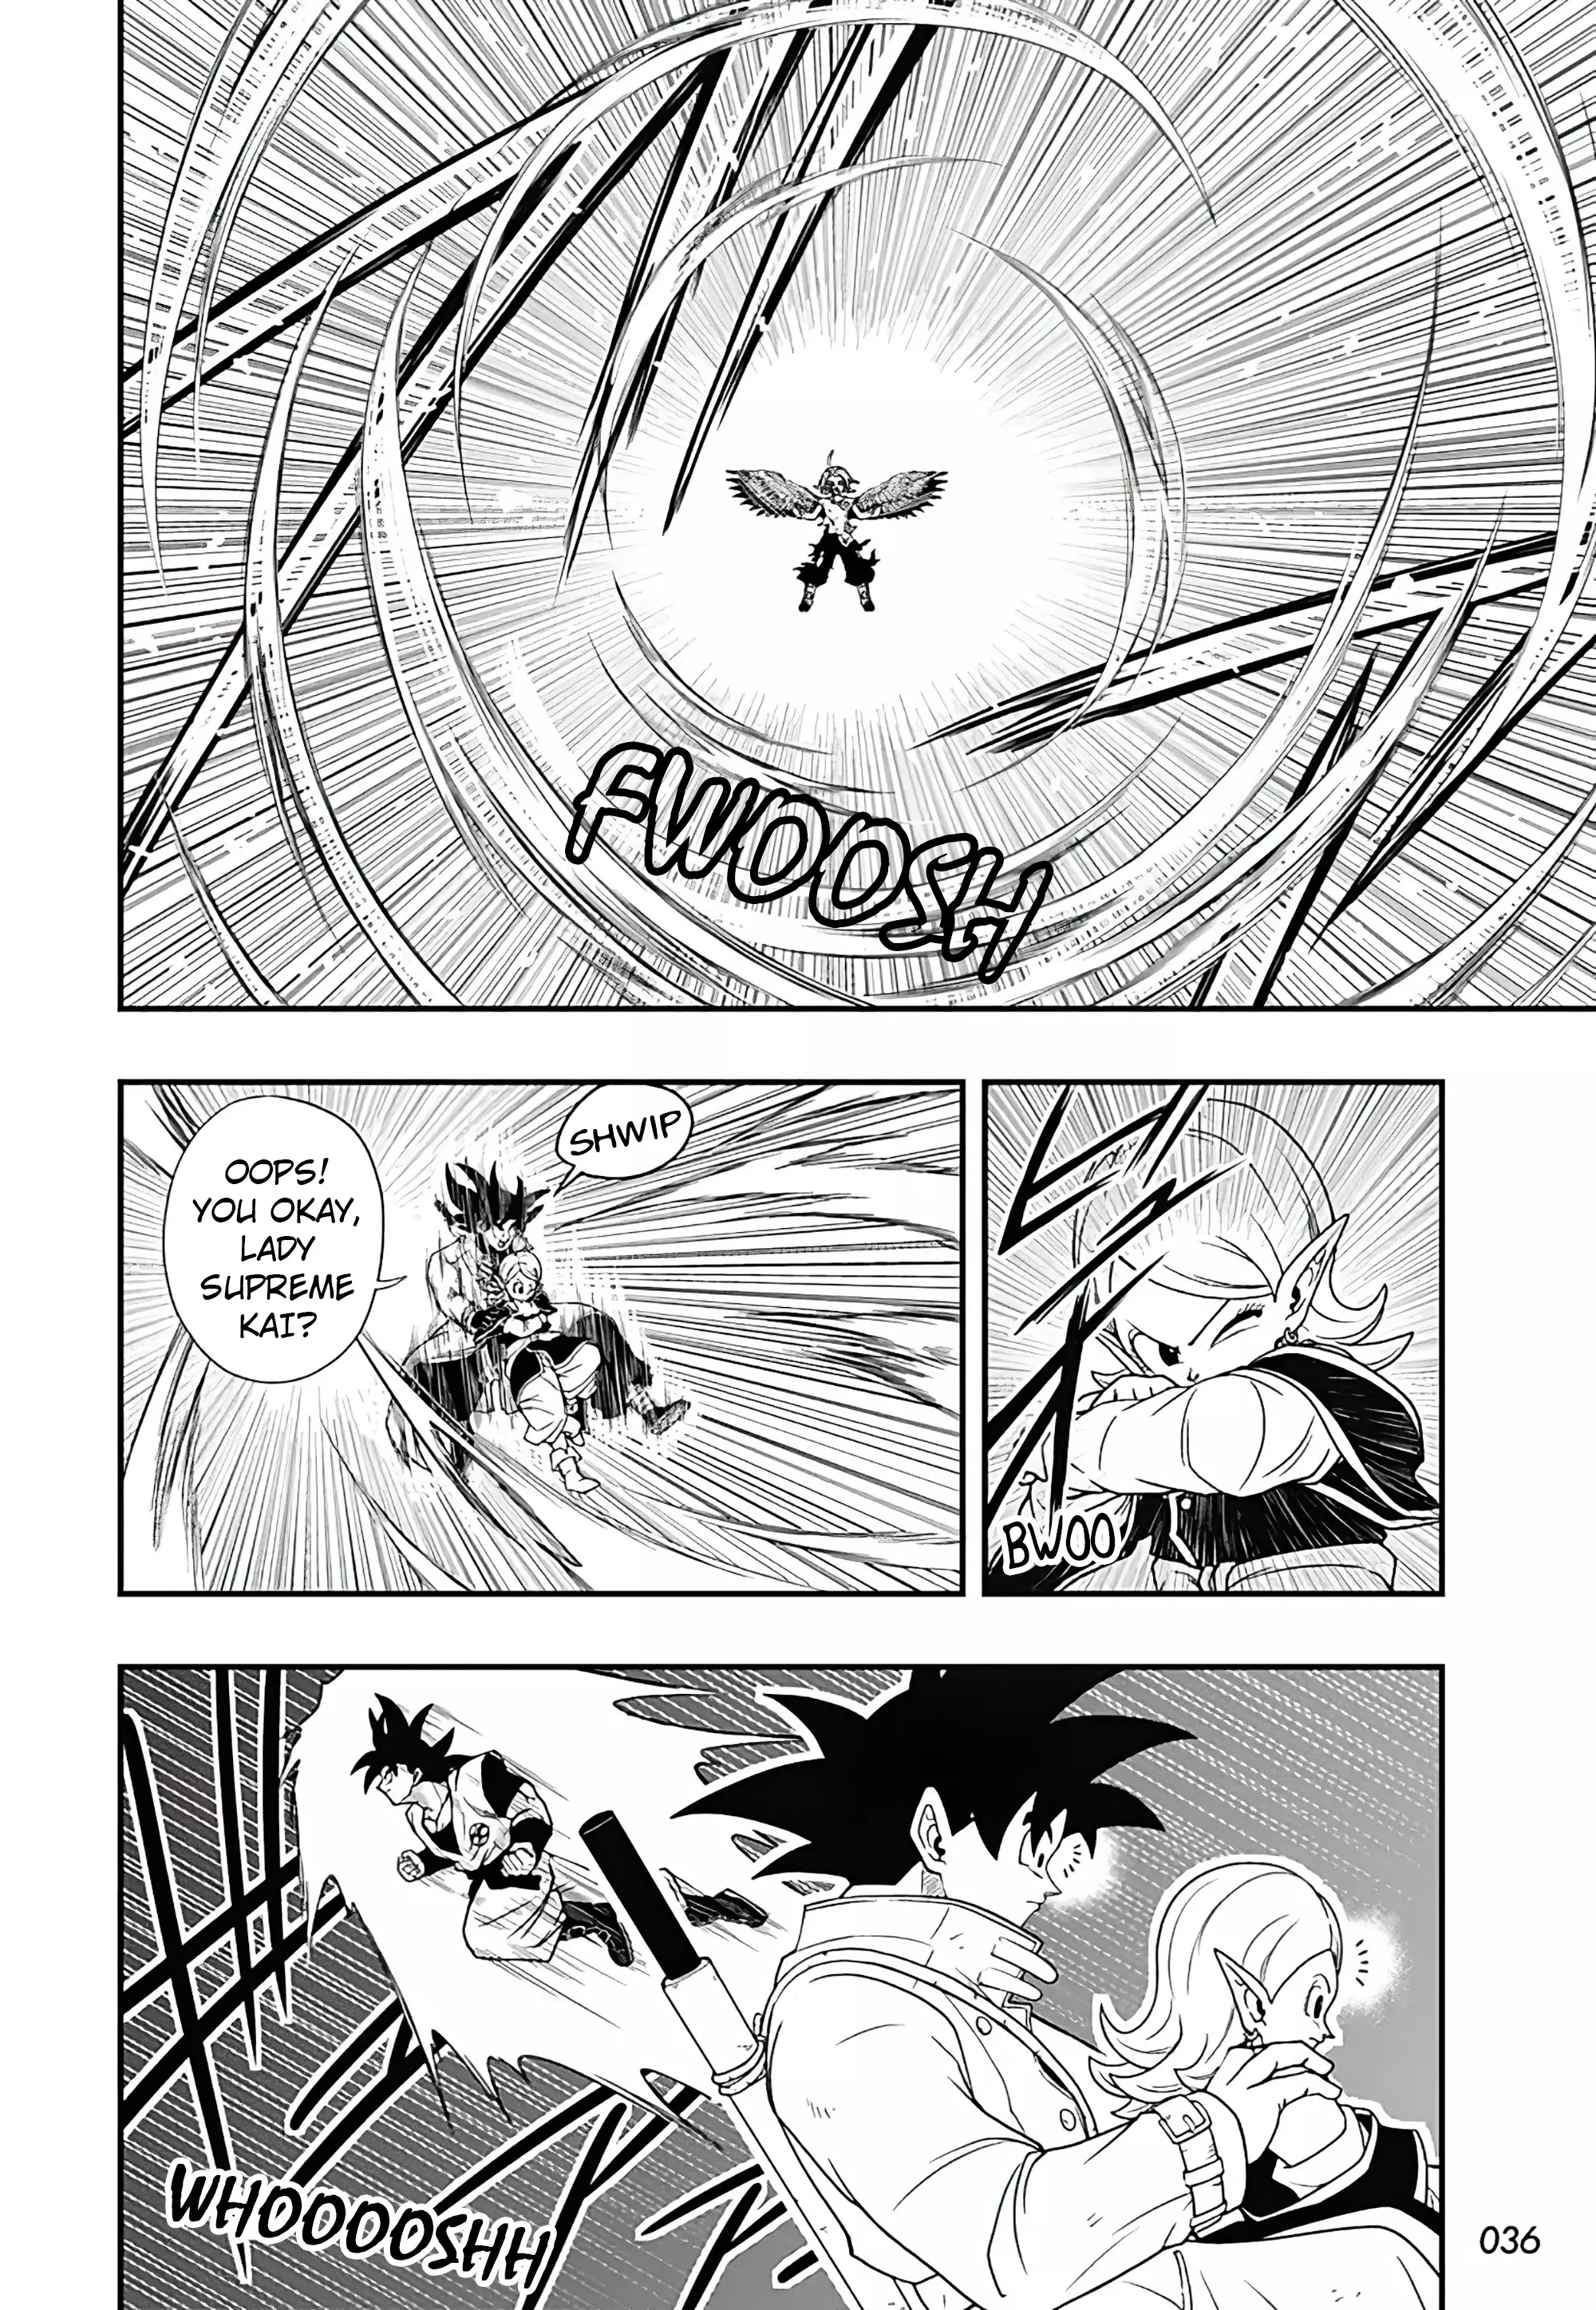 The Latest Chapter of the Super Dragon Ball Heroes: Big Bang